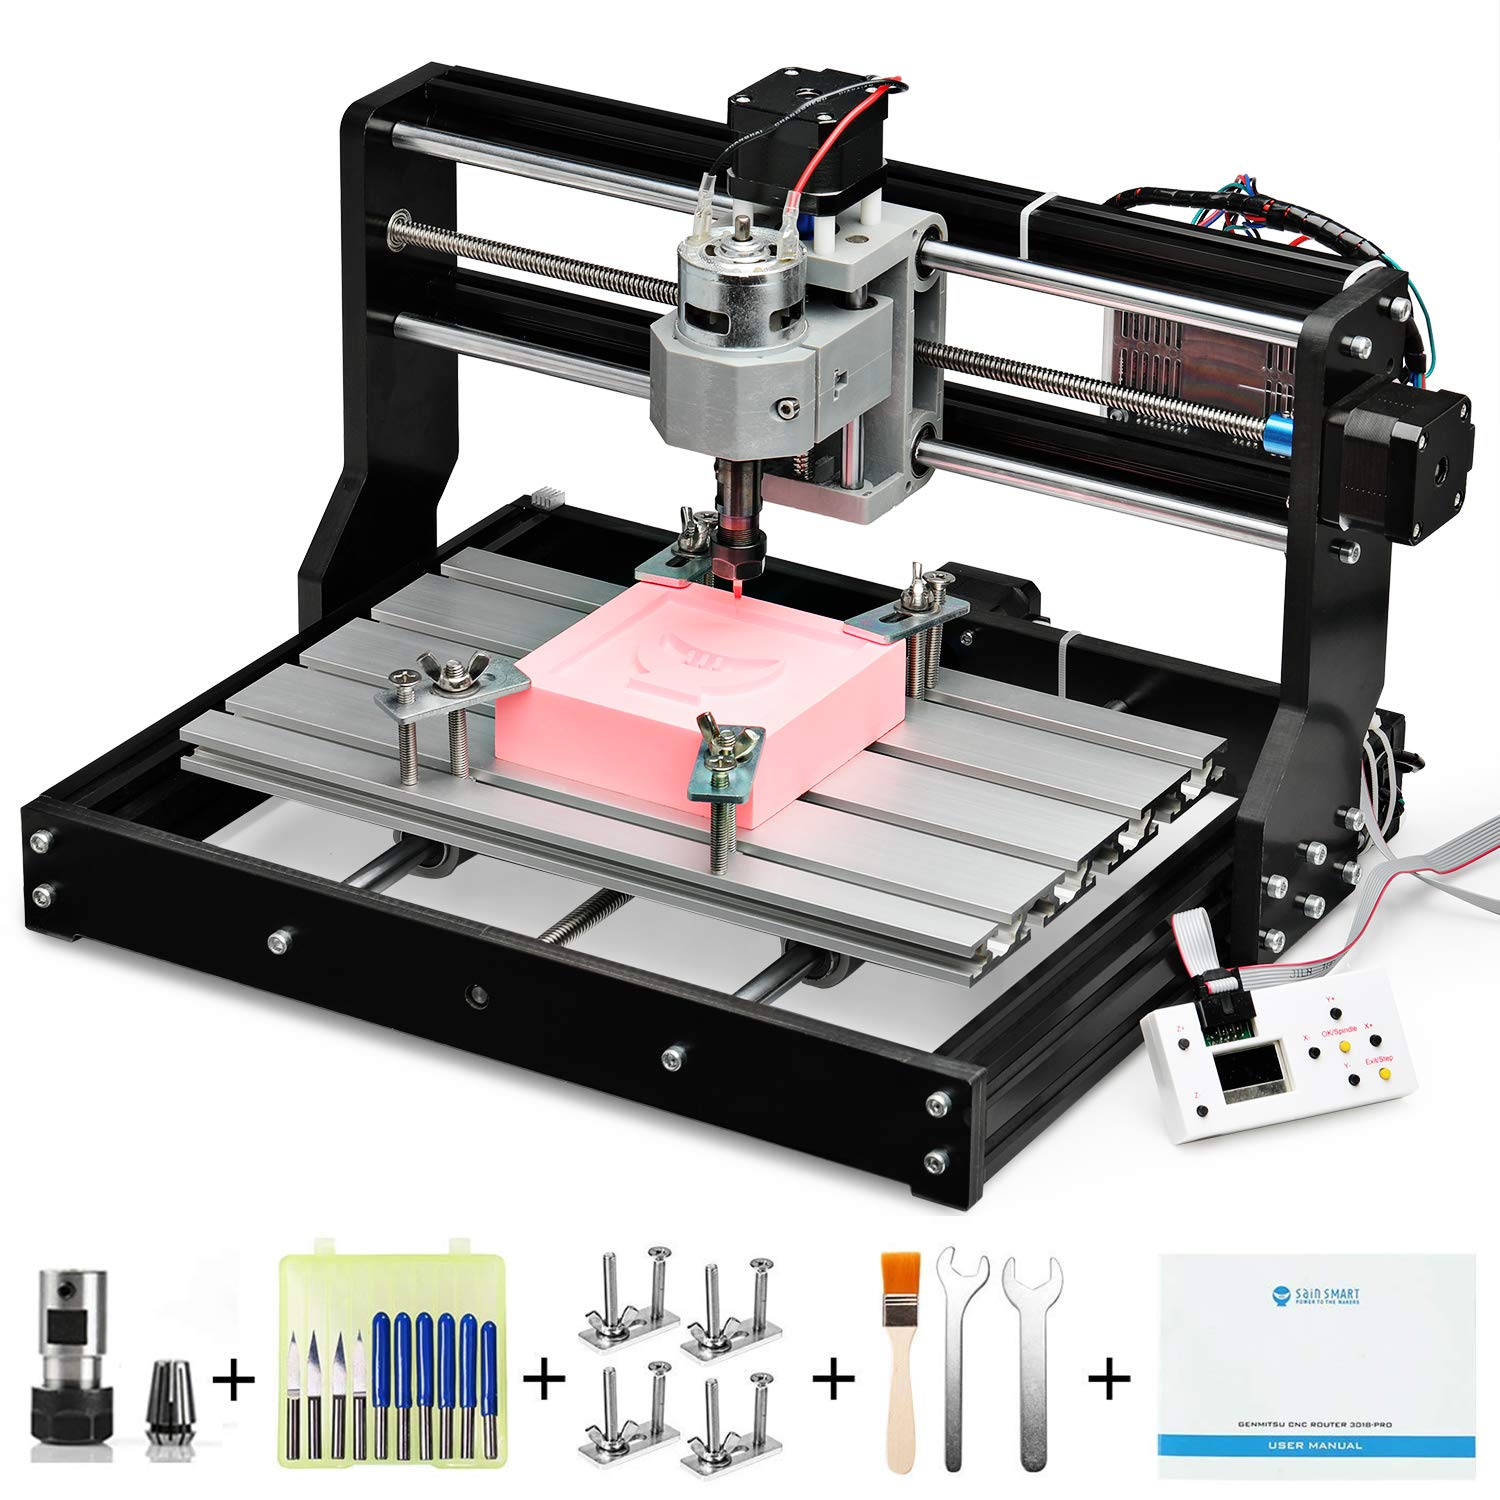 Genmitsu CNC 3018-PRO Router Kit GRBL Control 3 Axis